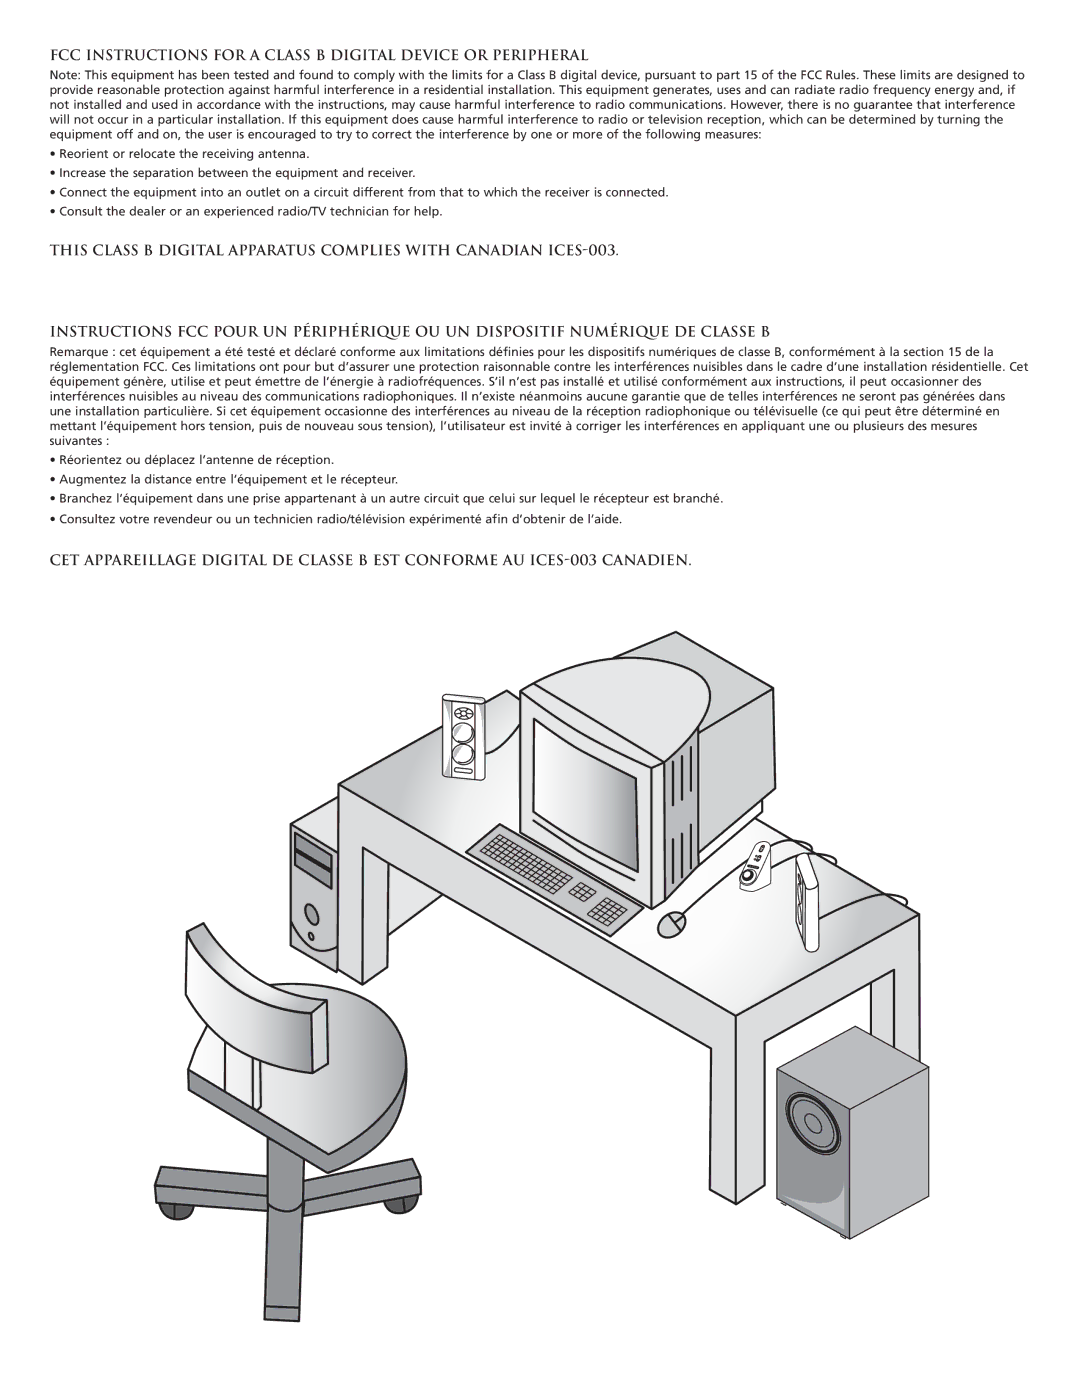 Altec Lansing MX5021 manual FCC Instructions for a Class B Digital Device or Peripheral 